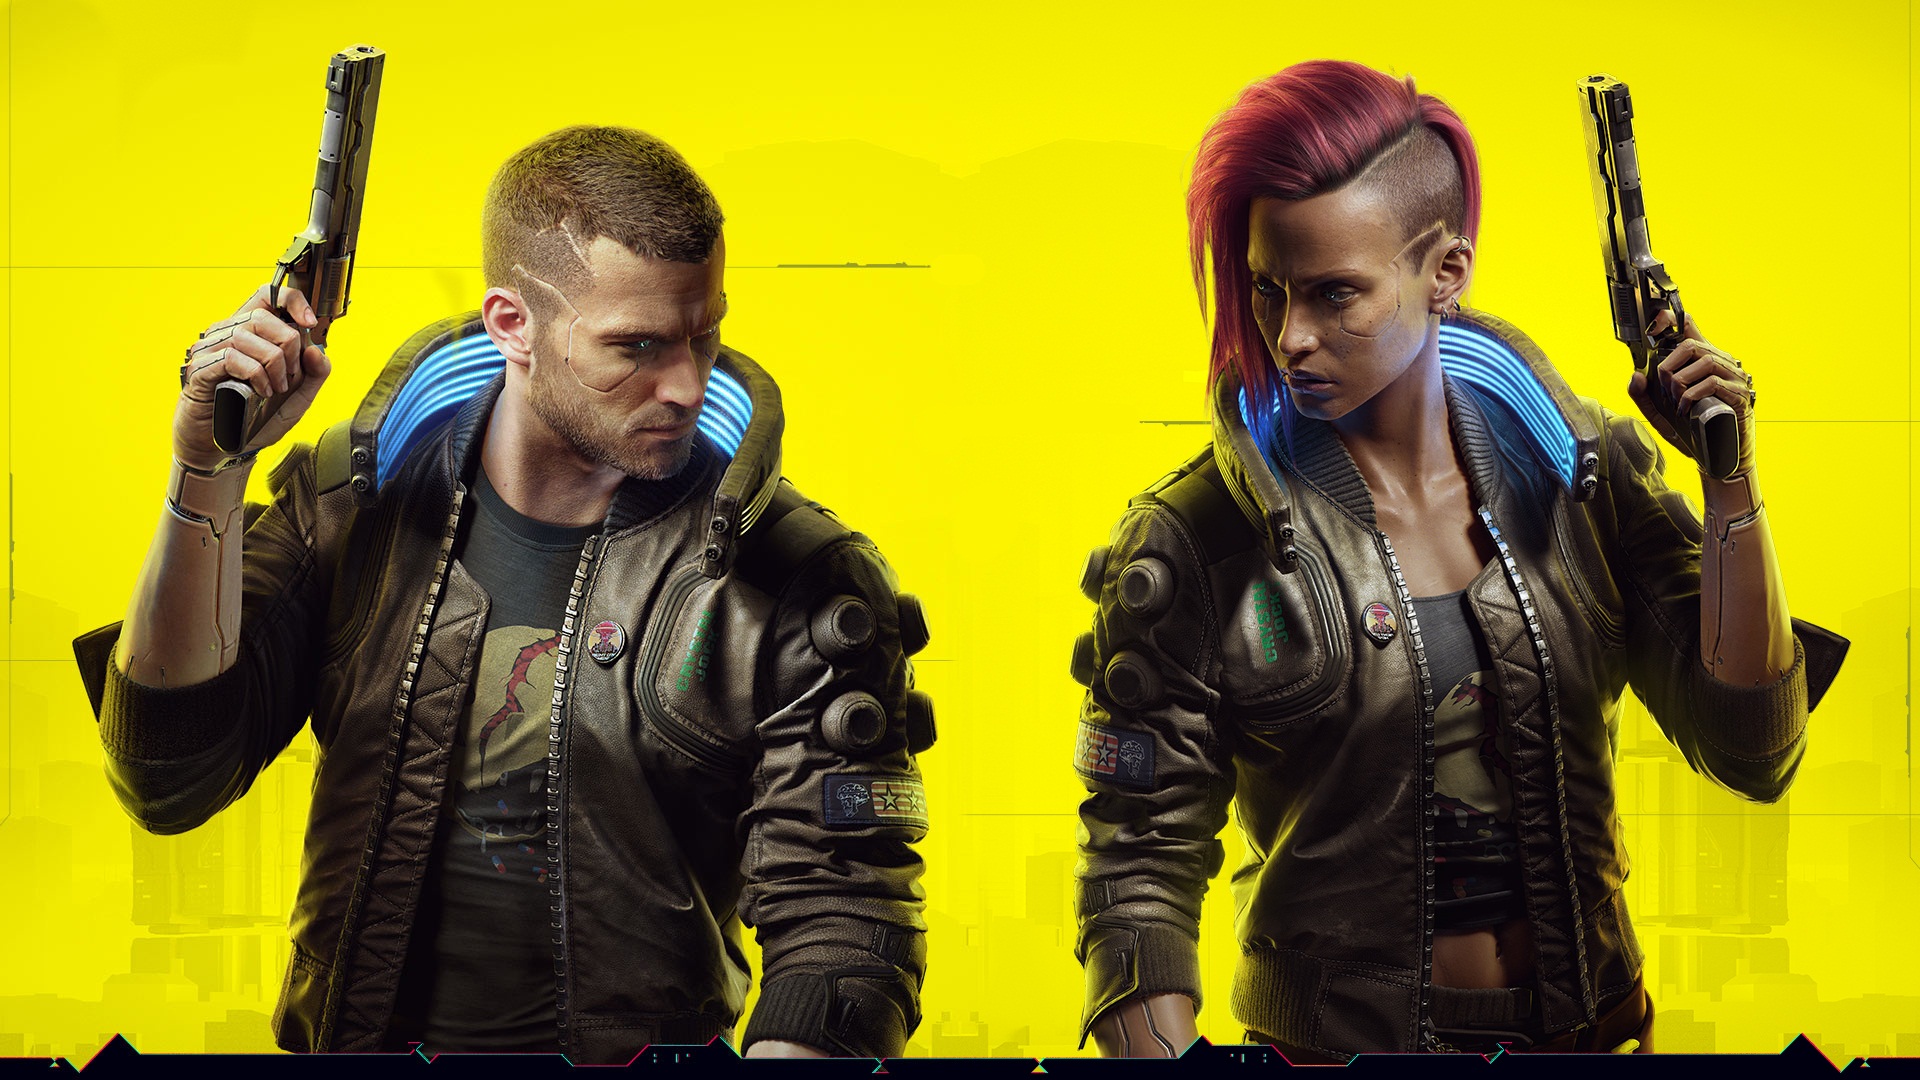 Cyberpunk 2077 Controversy So Far: Trans Commodification And Attack On The Epileptic